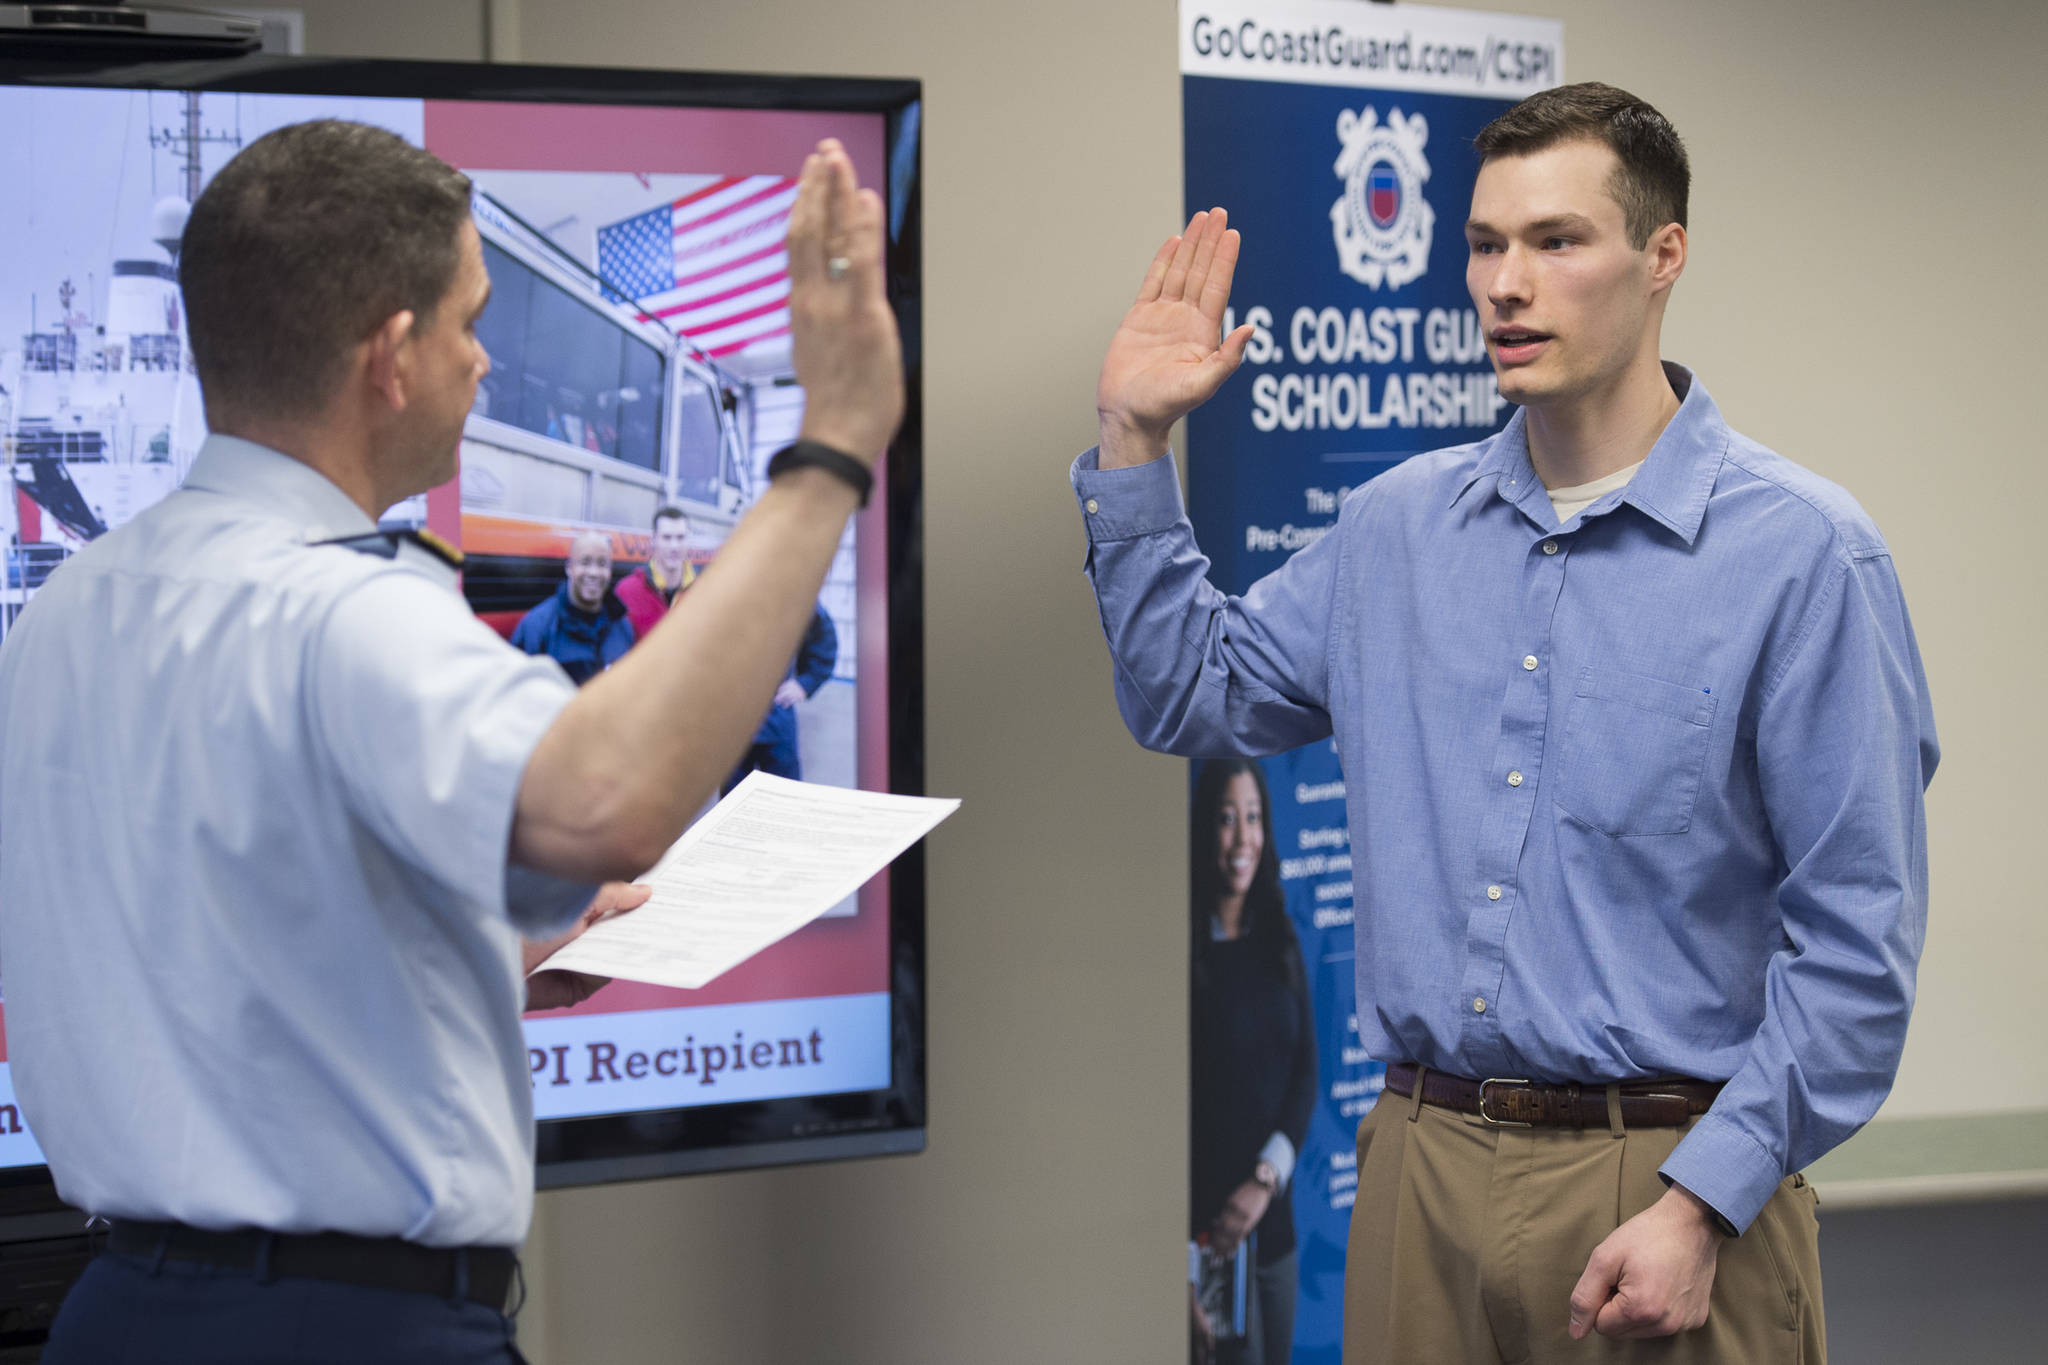 Logan Holt, 21, a business major at the University of Alaska Southeast, is sworn into the U.S. Coast Guard by Rear Admiral Matthew Bell Jr., commander of the 17th Coast Guard District, at UAS on Tuesday, April 9, 2019. Holt is the first recruit from UAS to be accepted into the Coast Guard’s College Student Pre-Commissioning Initiative program. (Michael Penn | Juneau Empire)